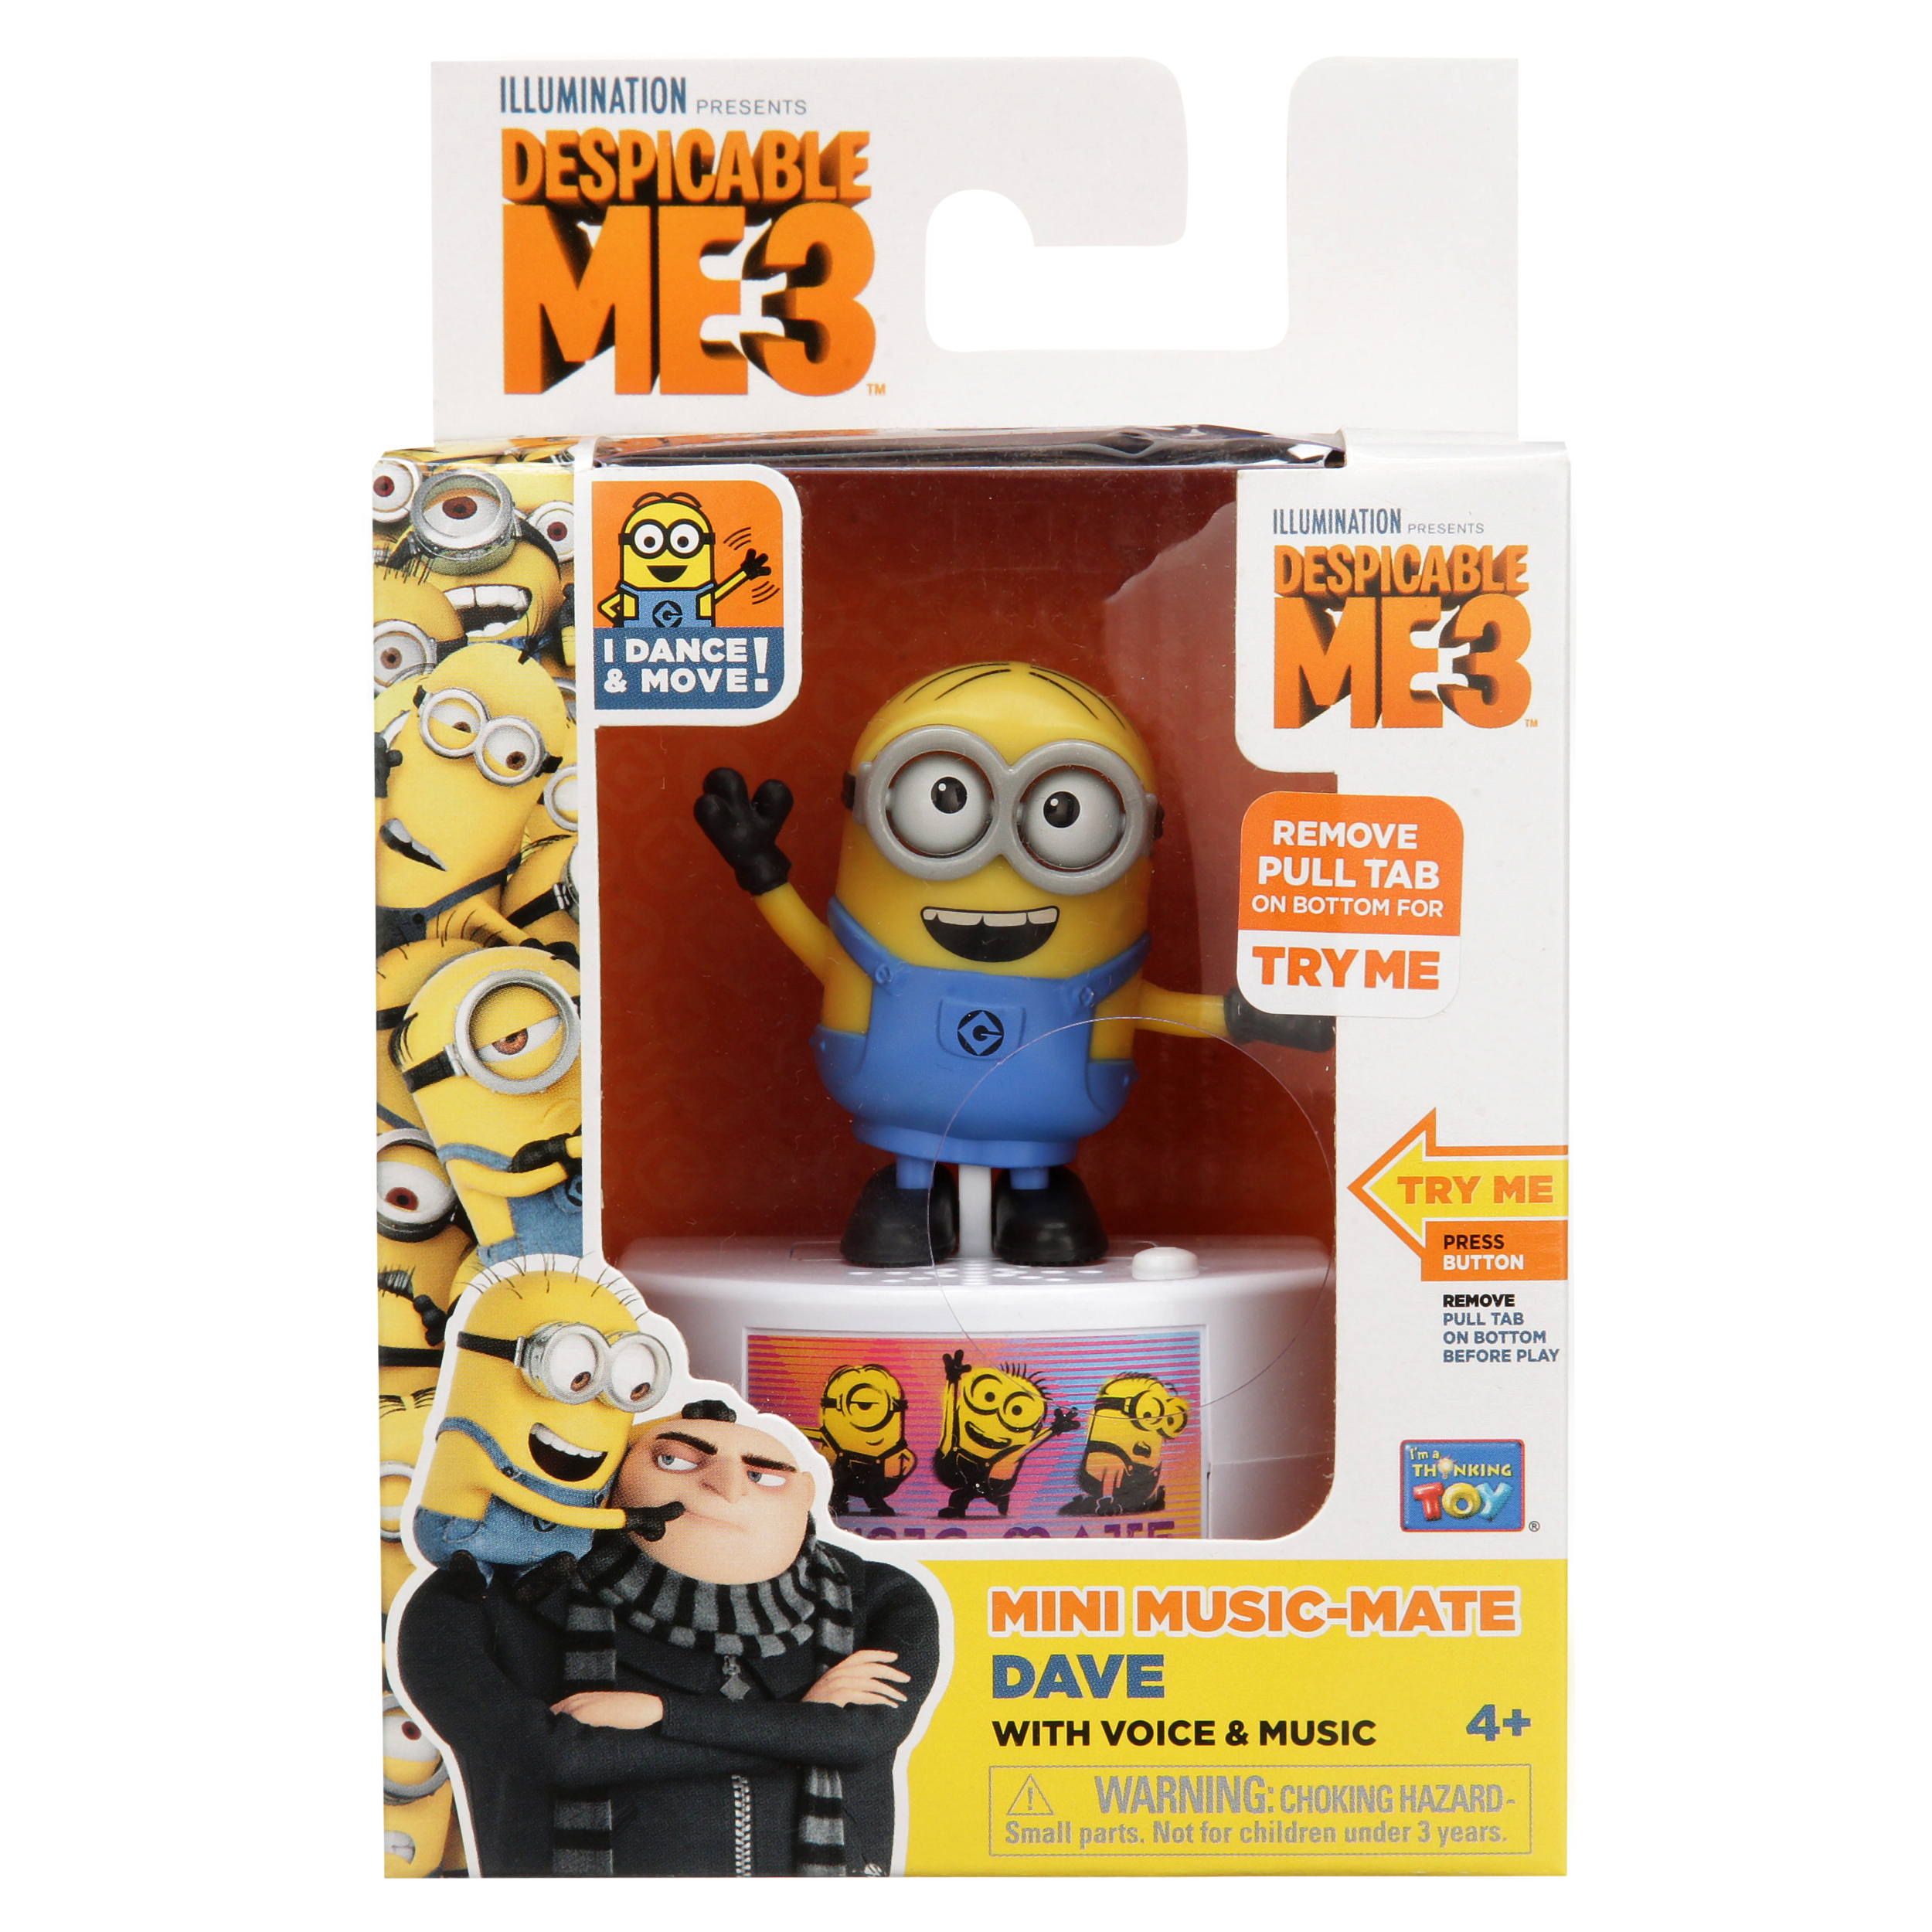 Despicable Me 3 Minion Music-Mate Dave with Voice and Music - image 2 of 5